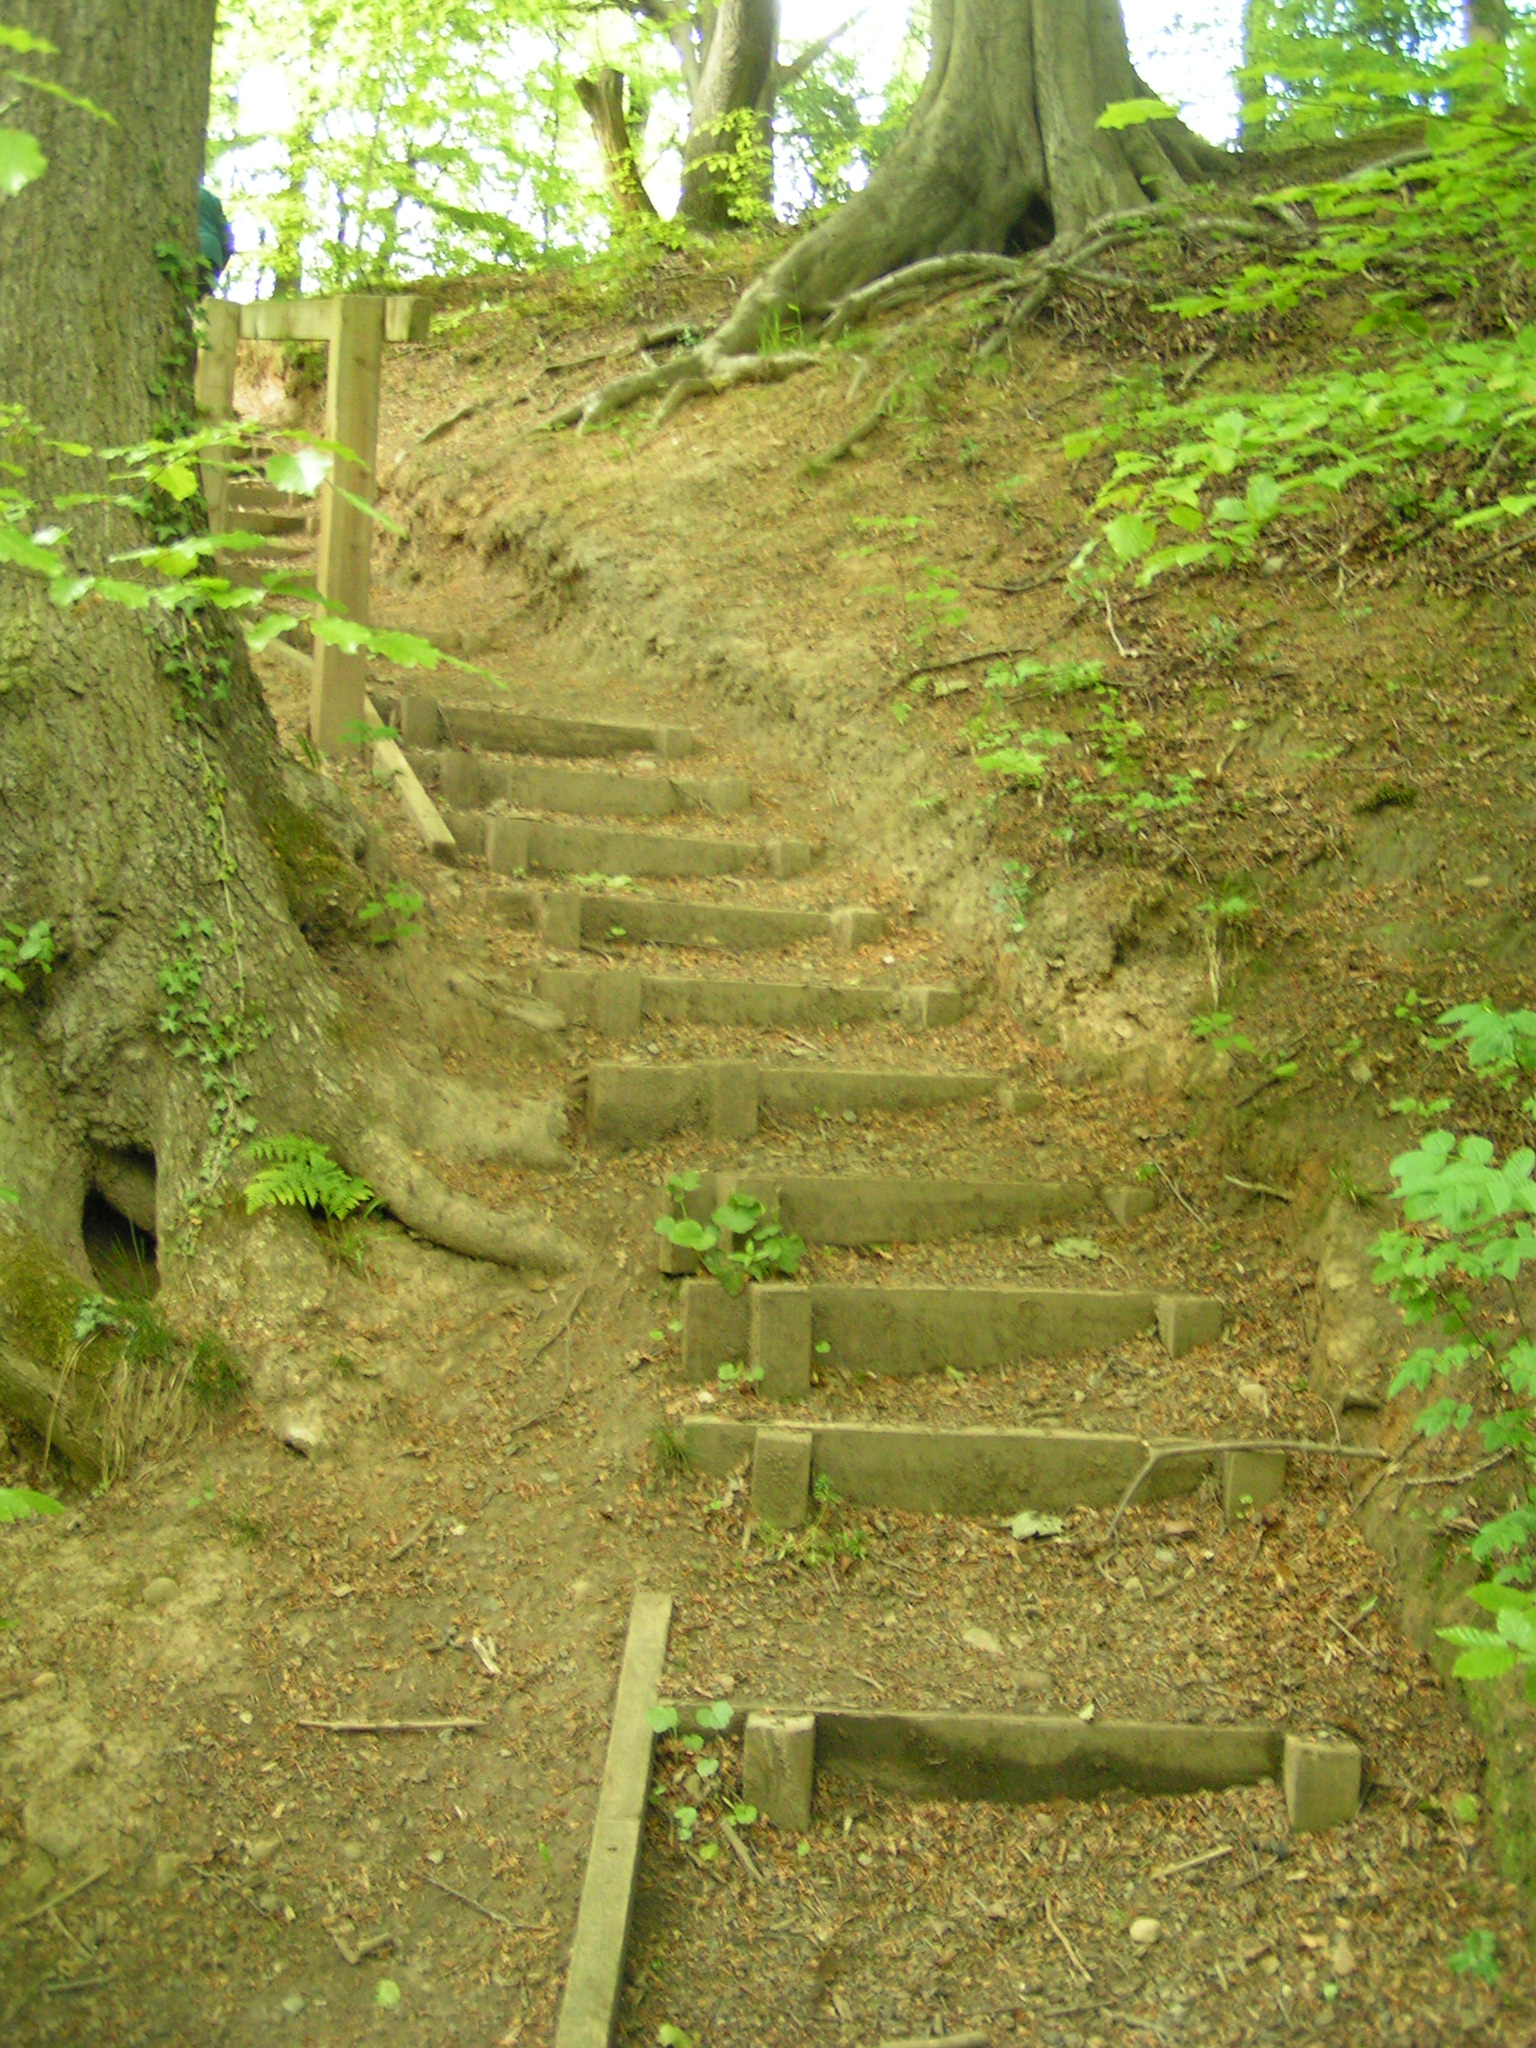 some steps are going up a hill near a tree